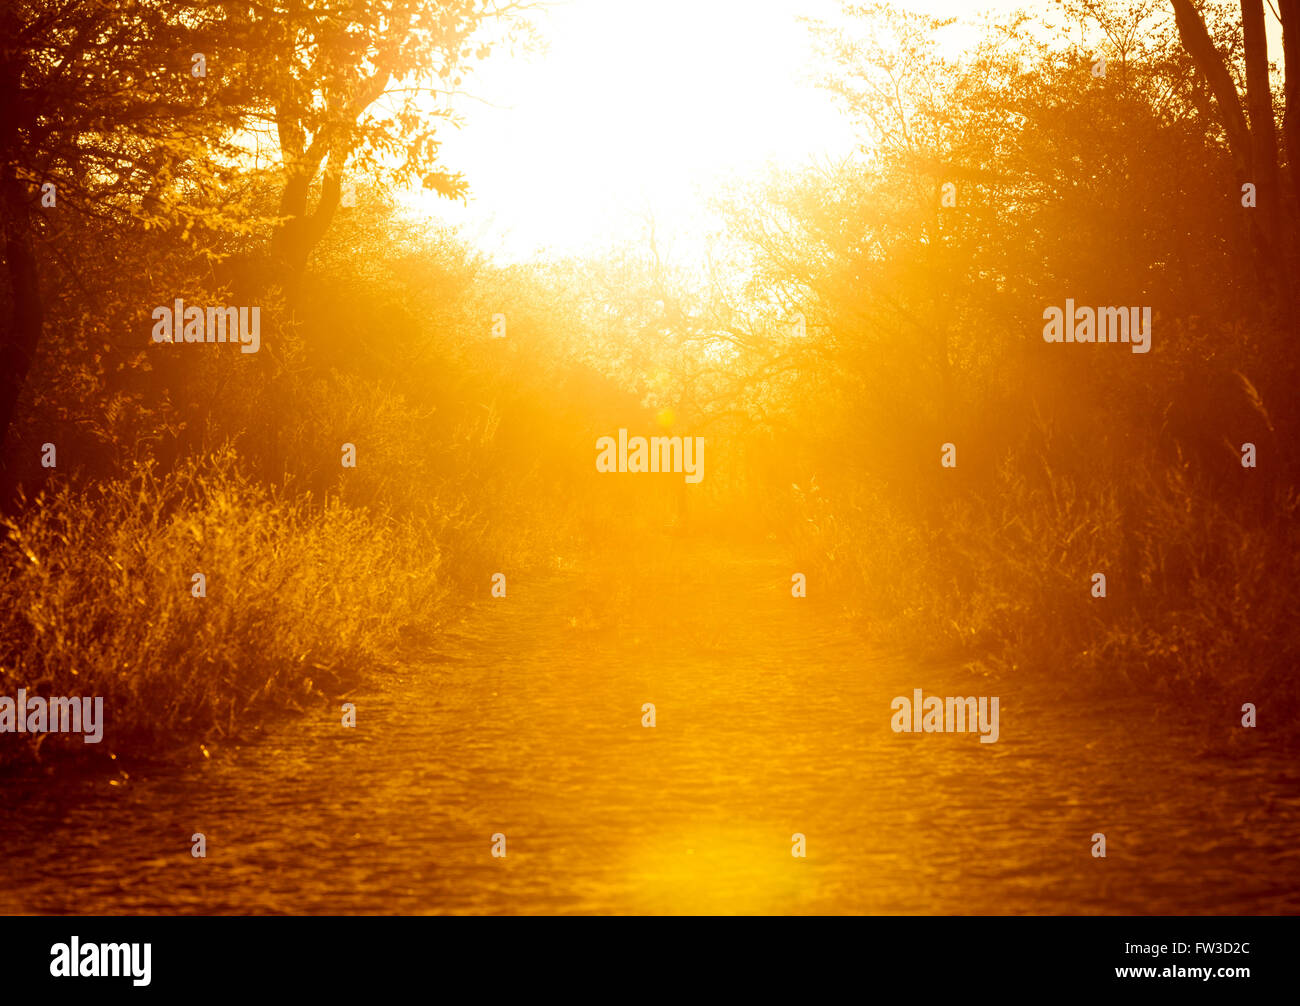 Sunset background of a golden glow in the forest with sunset light filtering through Stock Photo